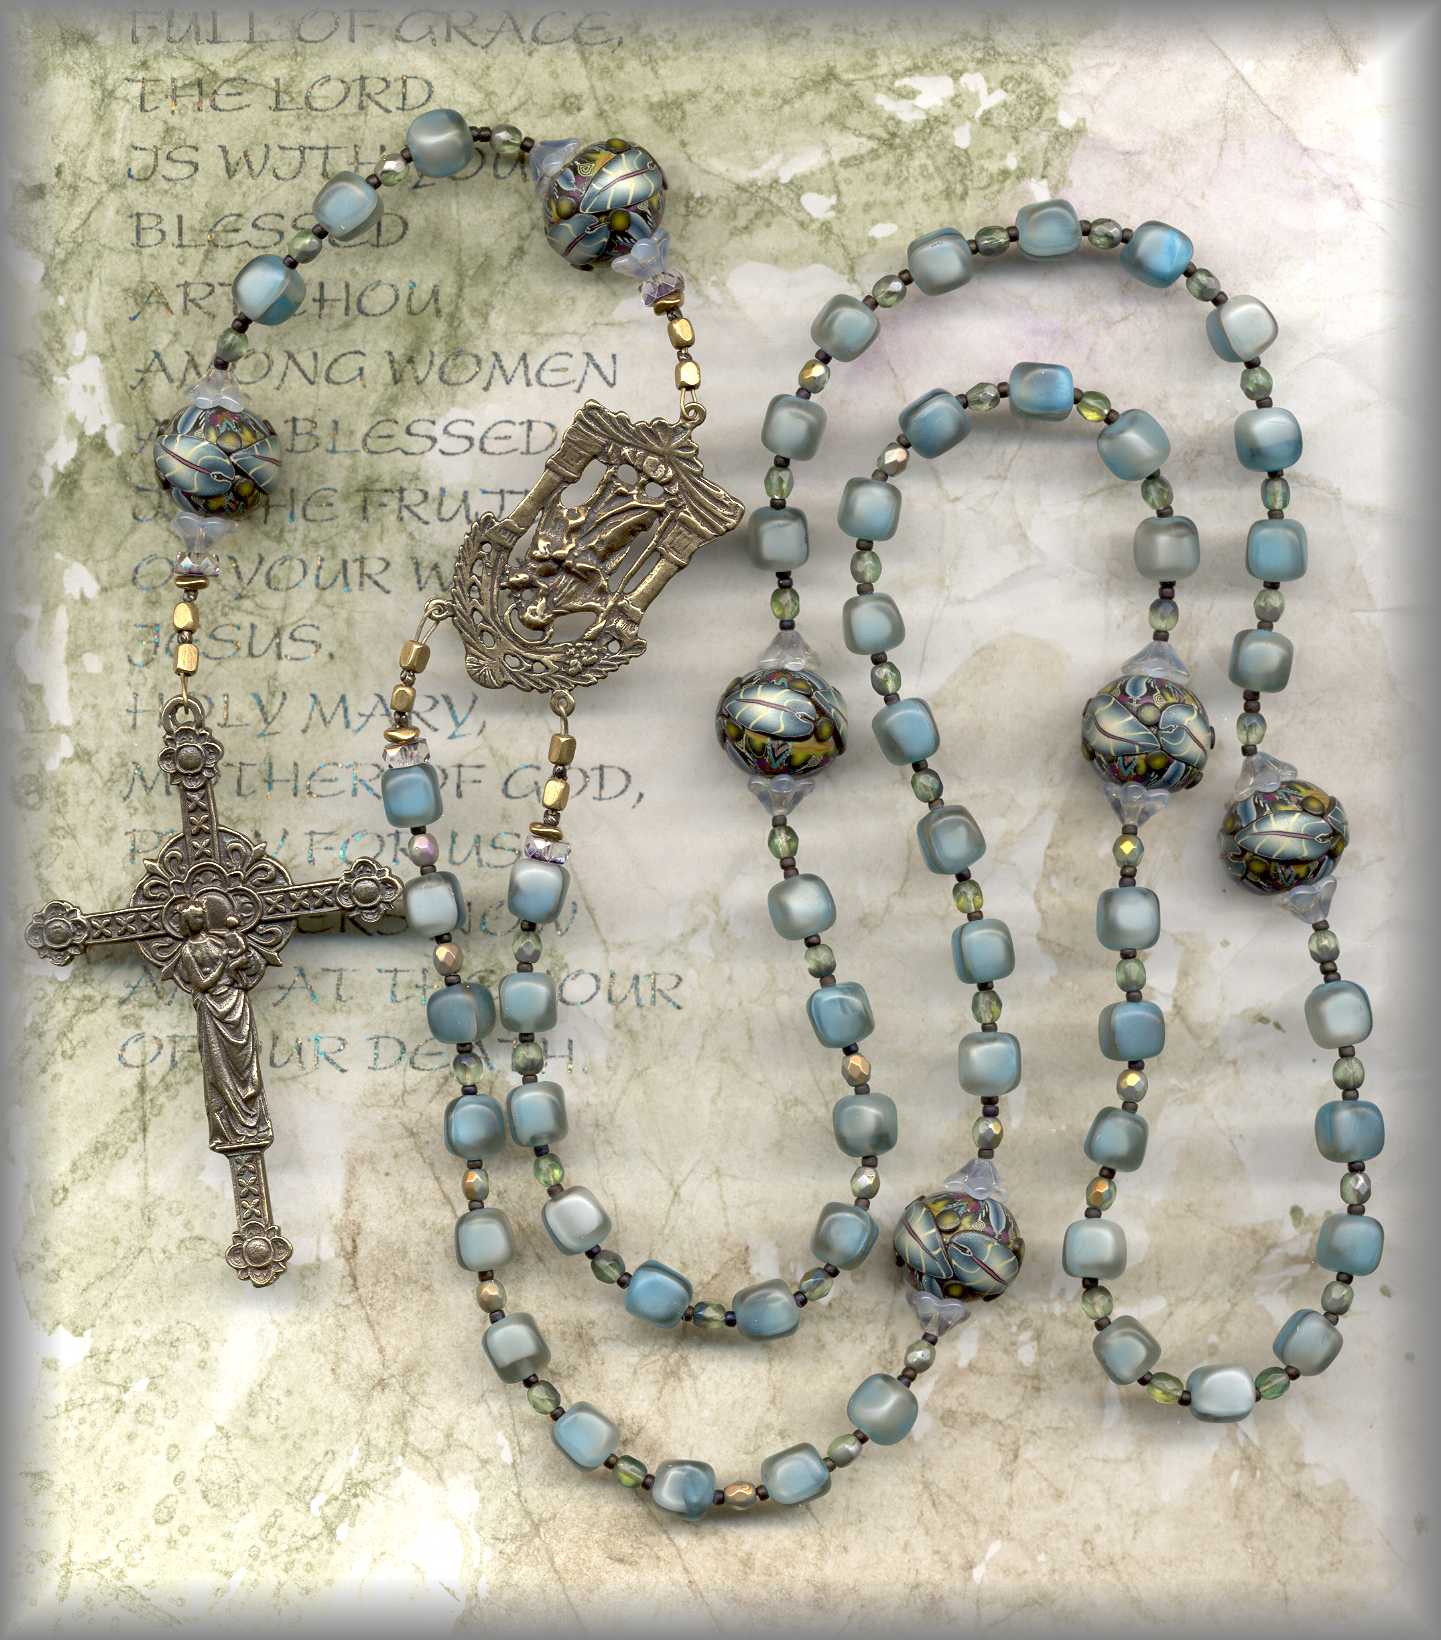 Rosary Workshop: Service - How to make Rosaries